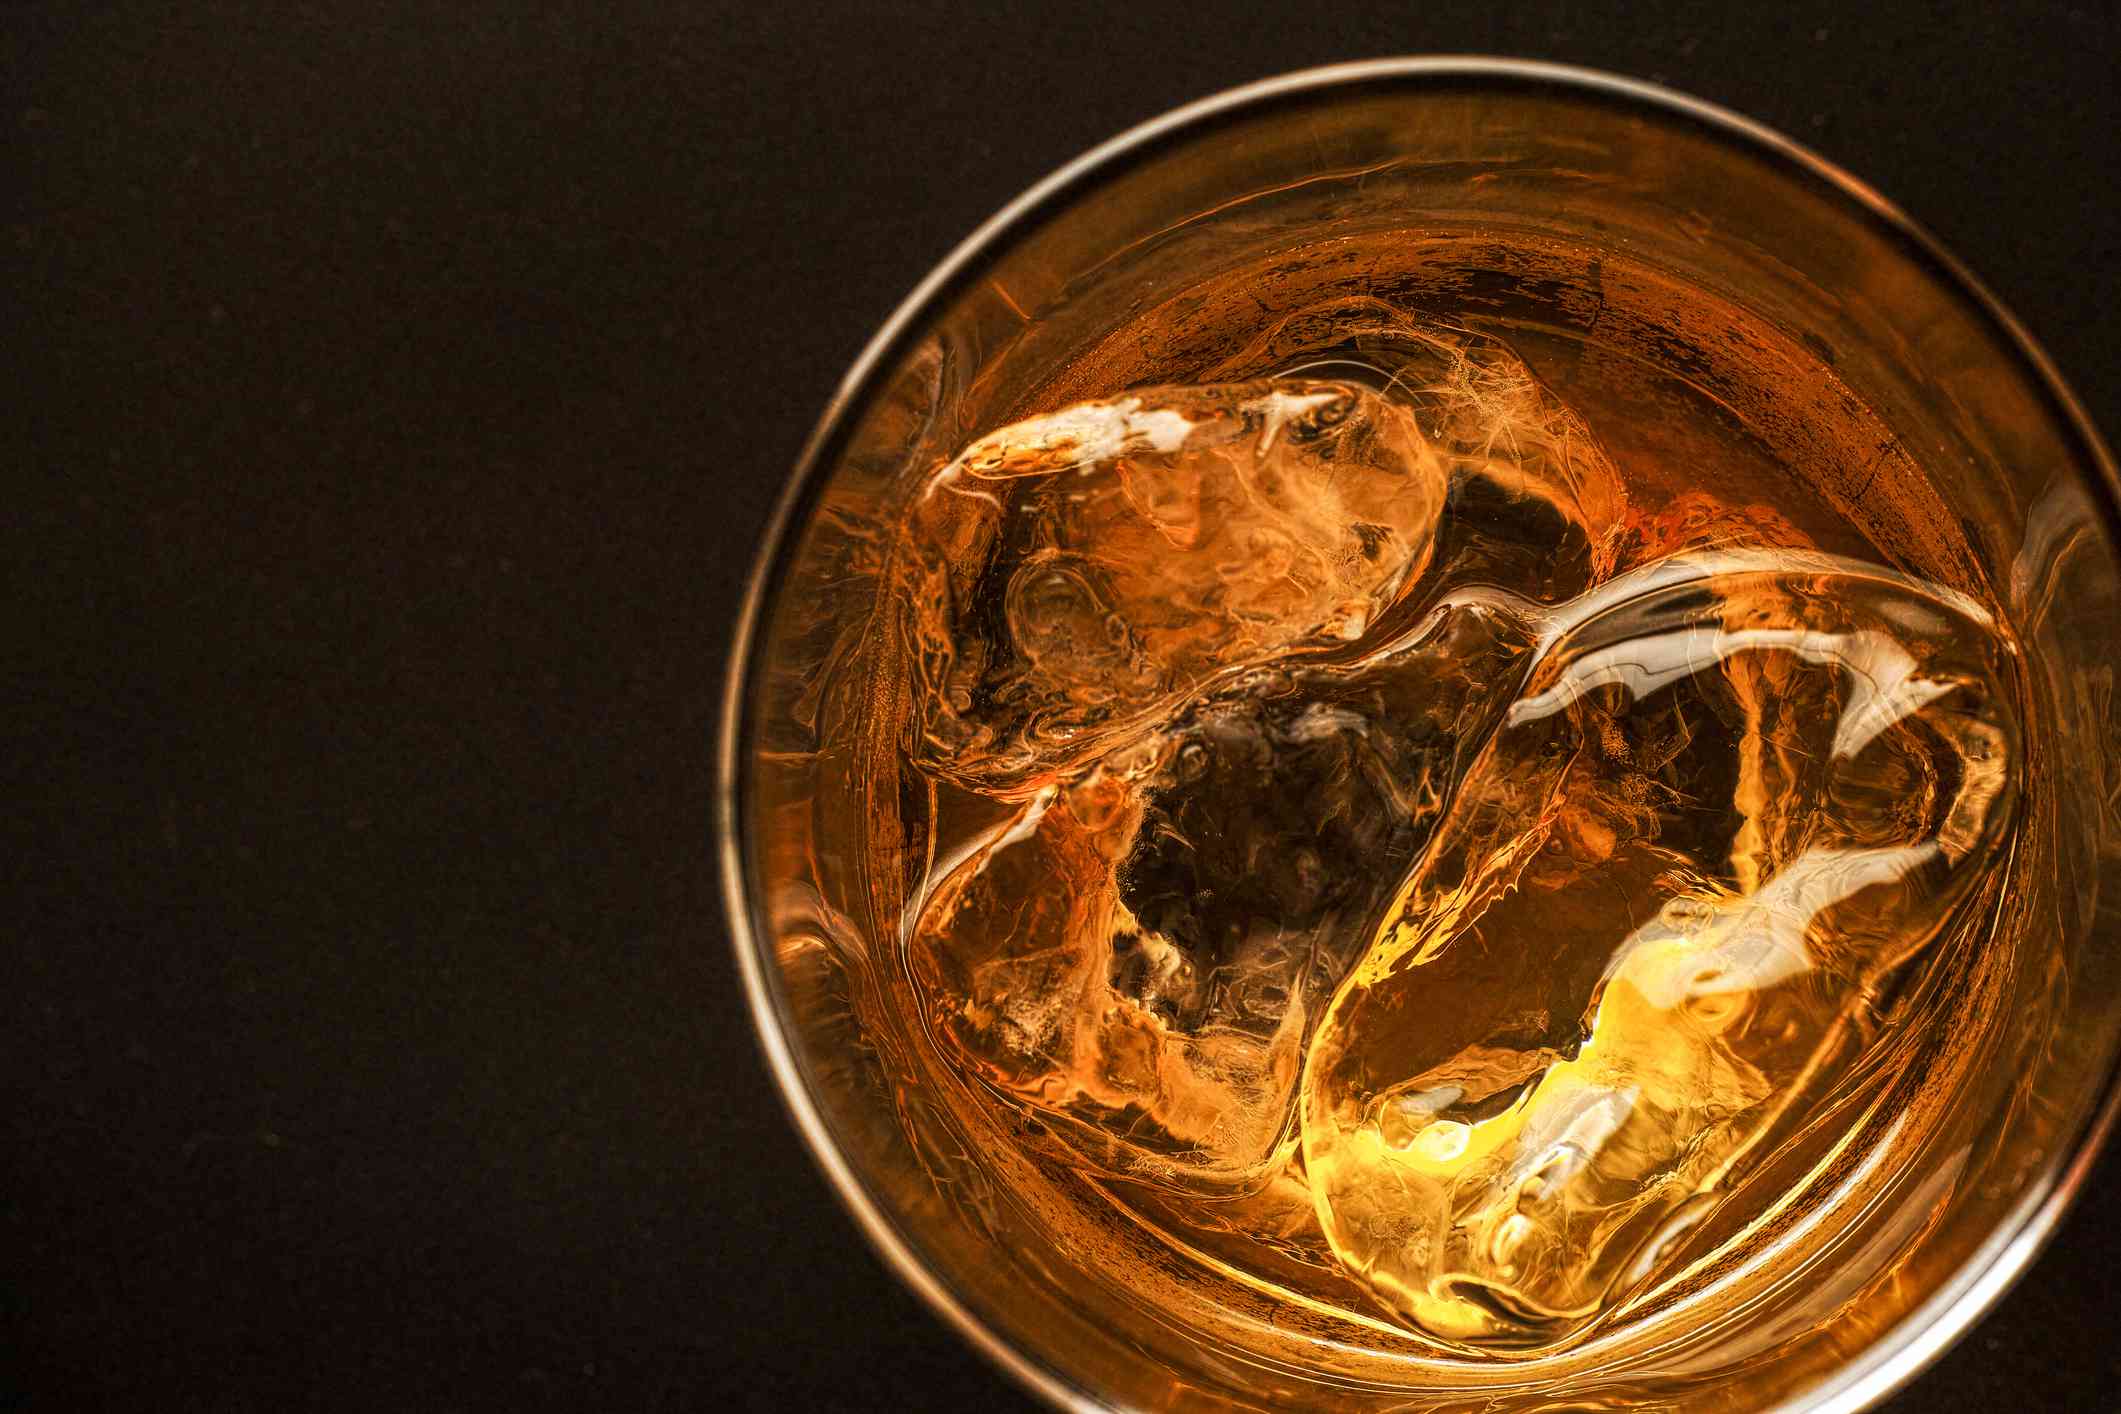 Full whiskey glass on a black background as seen from above